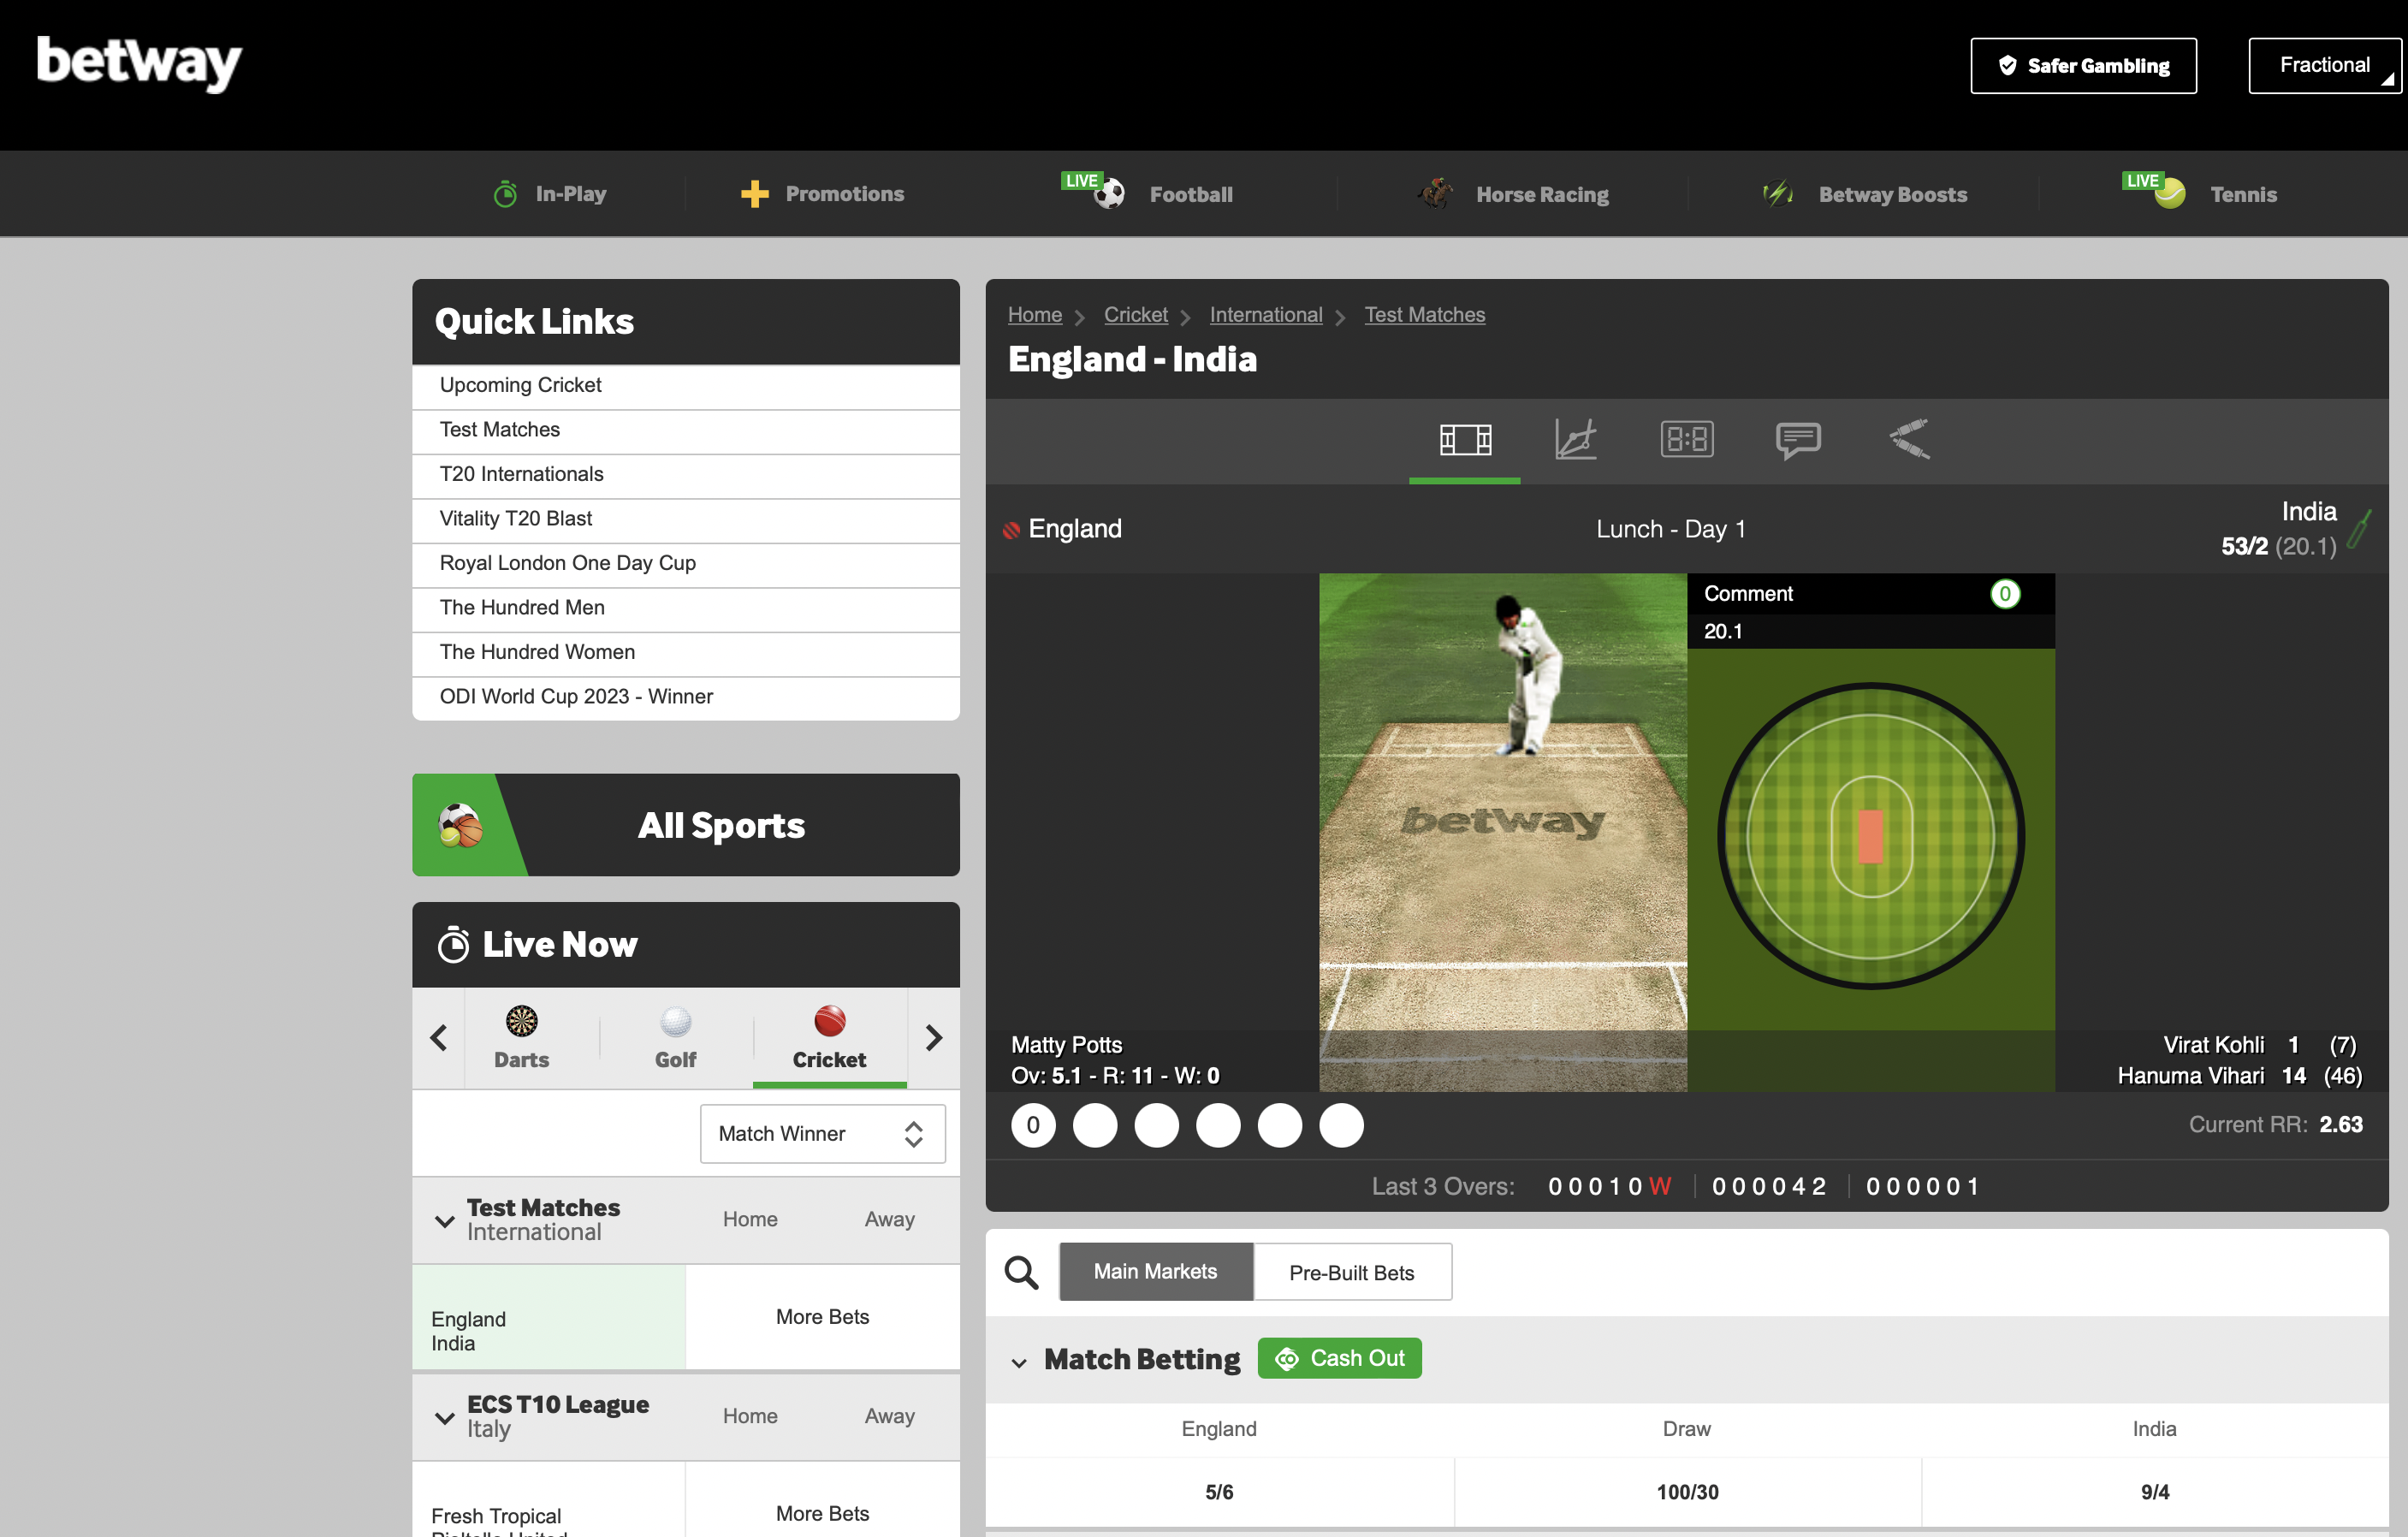 screen shot of the Betway cricket betting screen